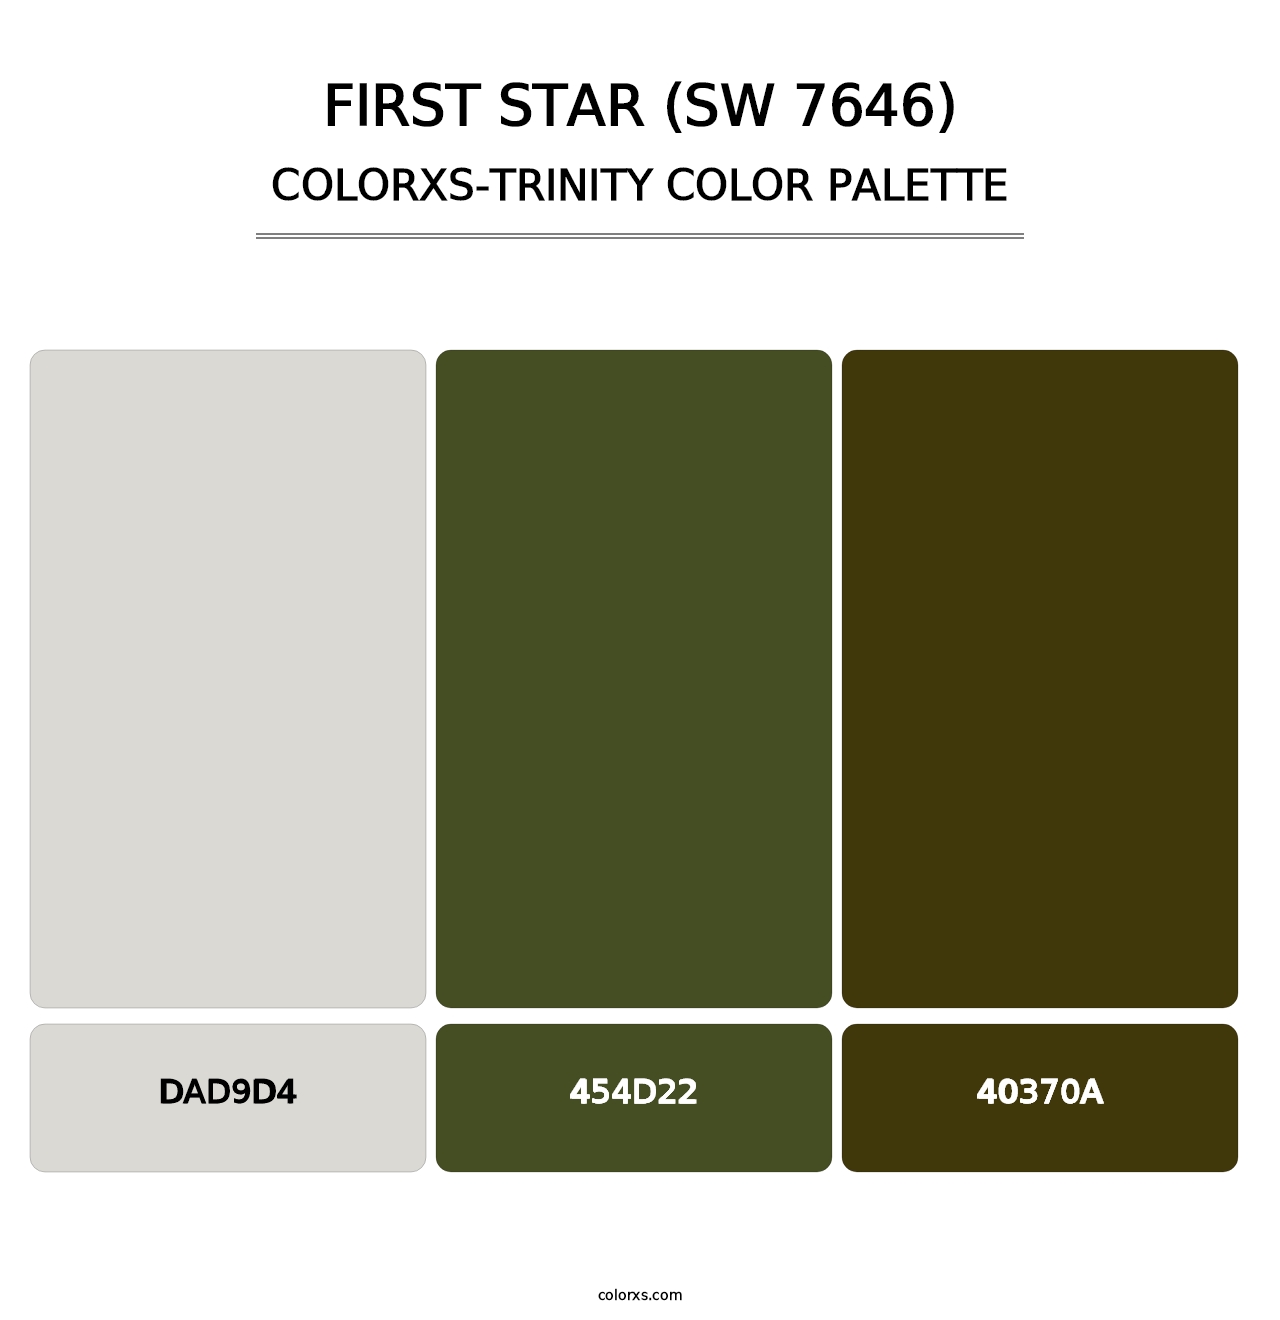 First Star (SW 7646) - Colorxs Trinity Palette